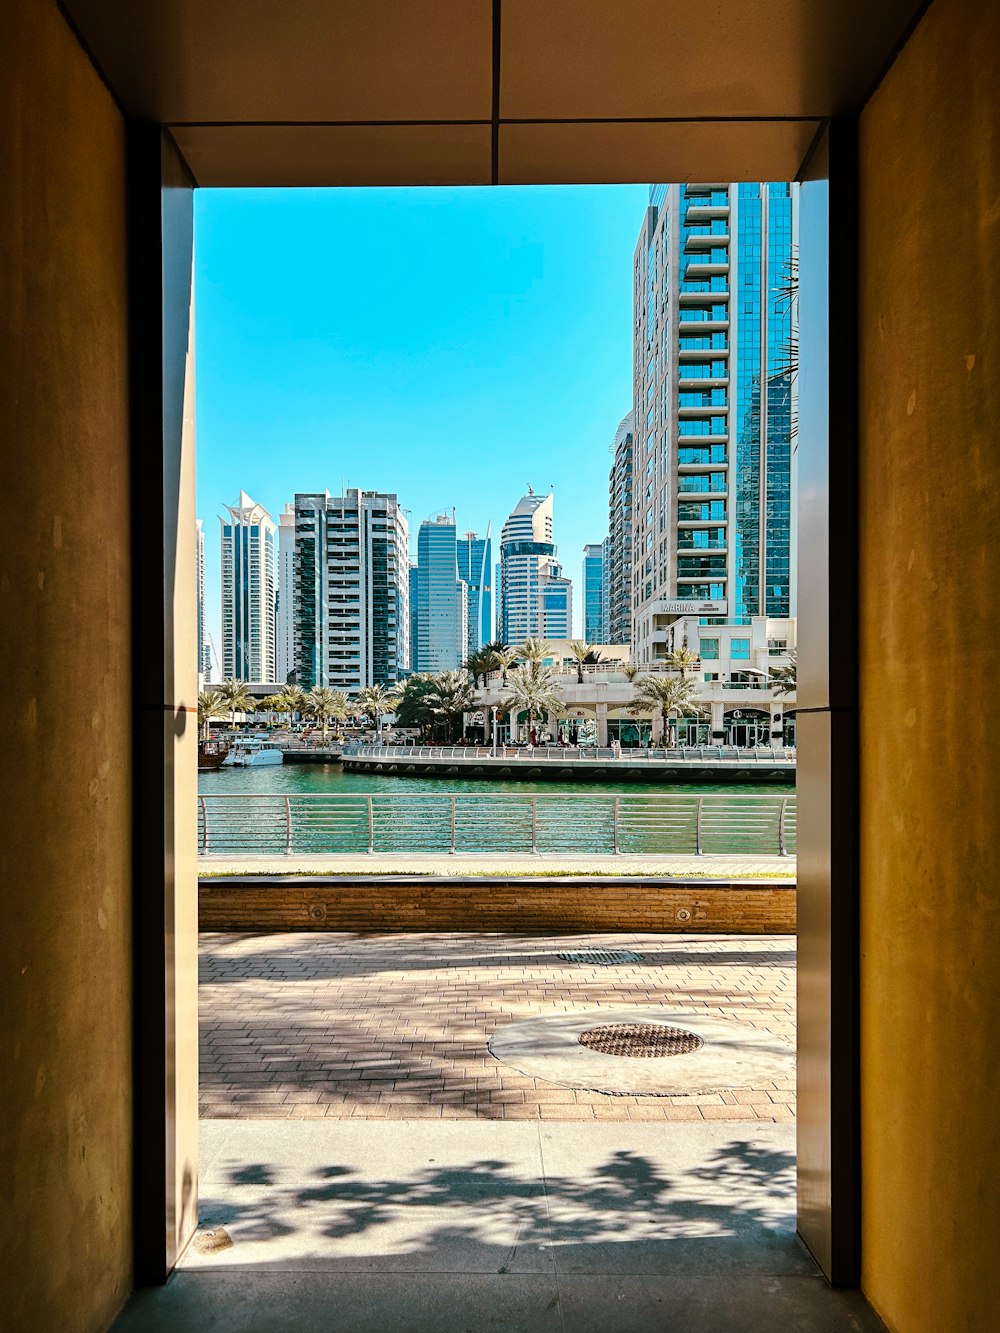 a view of a body of water from inside a building